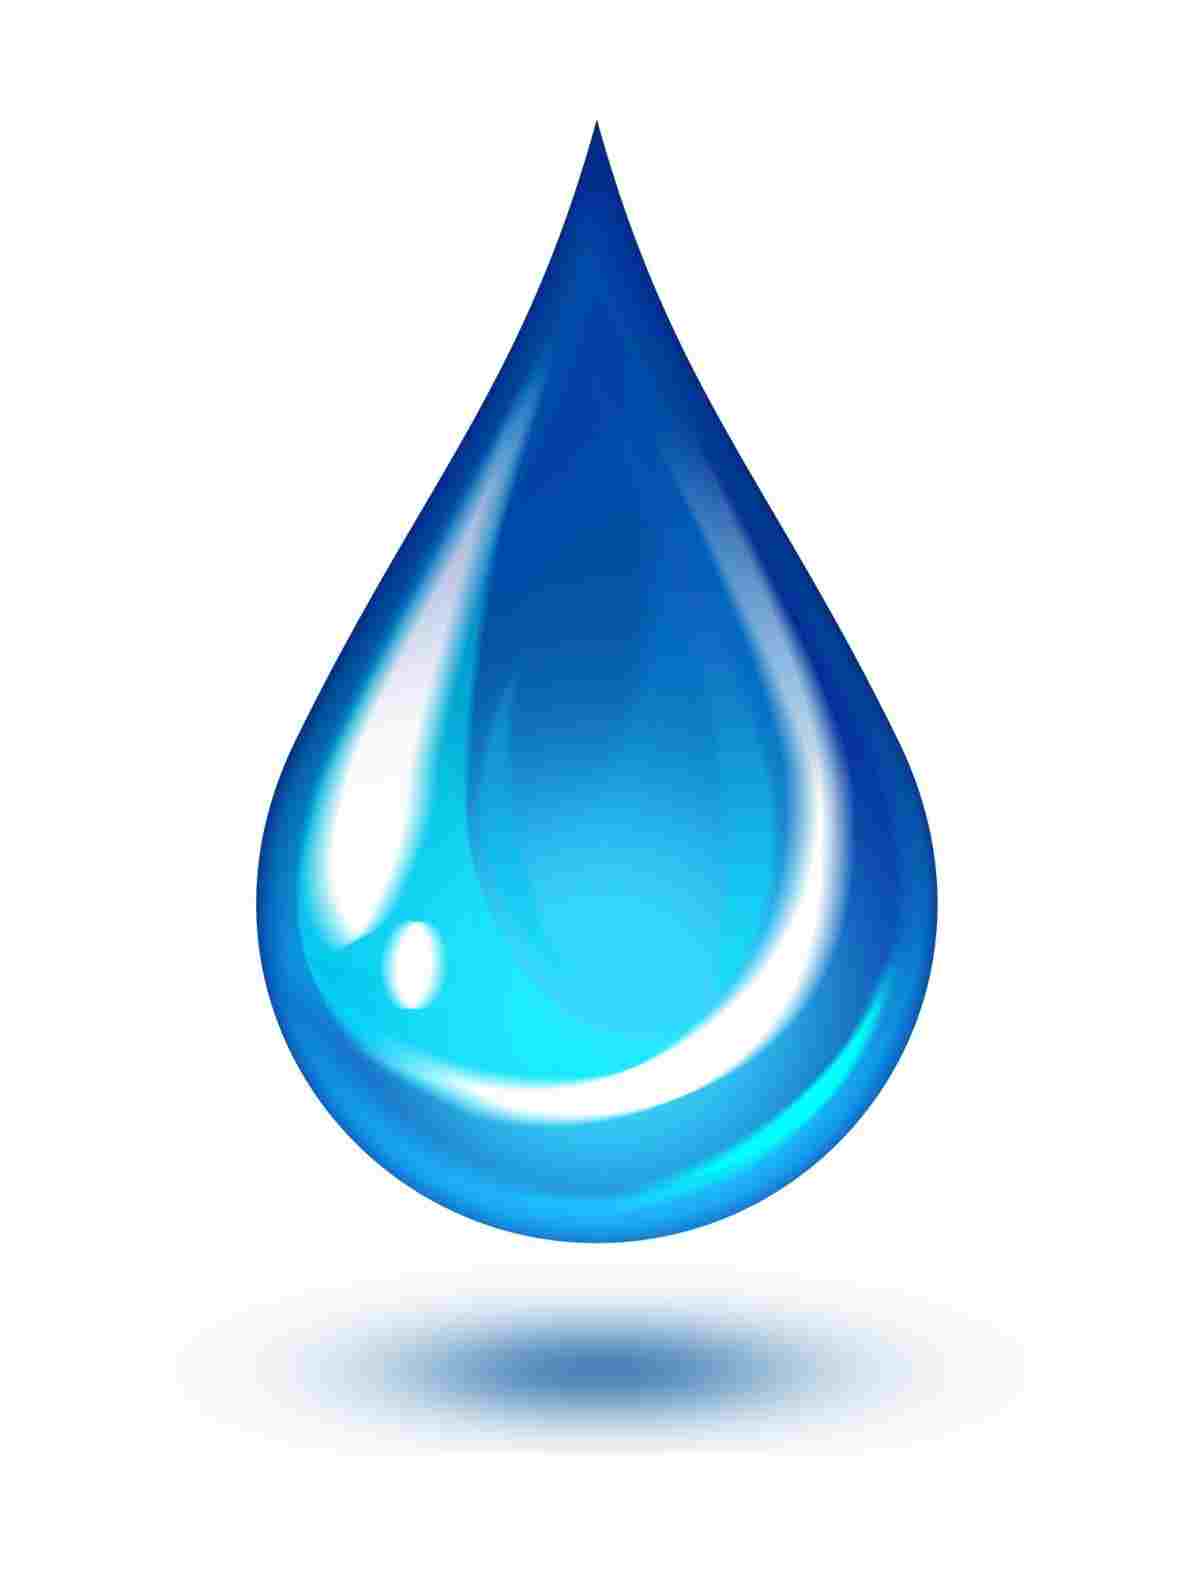 Water Drop Drawing | Free download on ClipArtMag